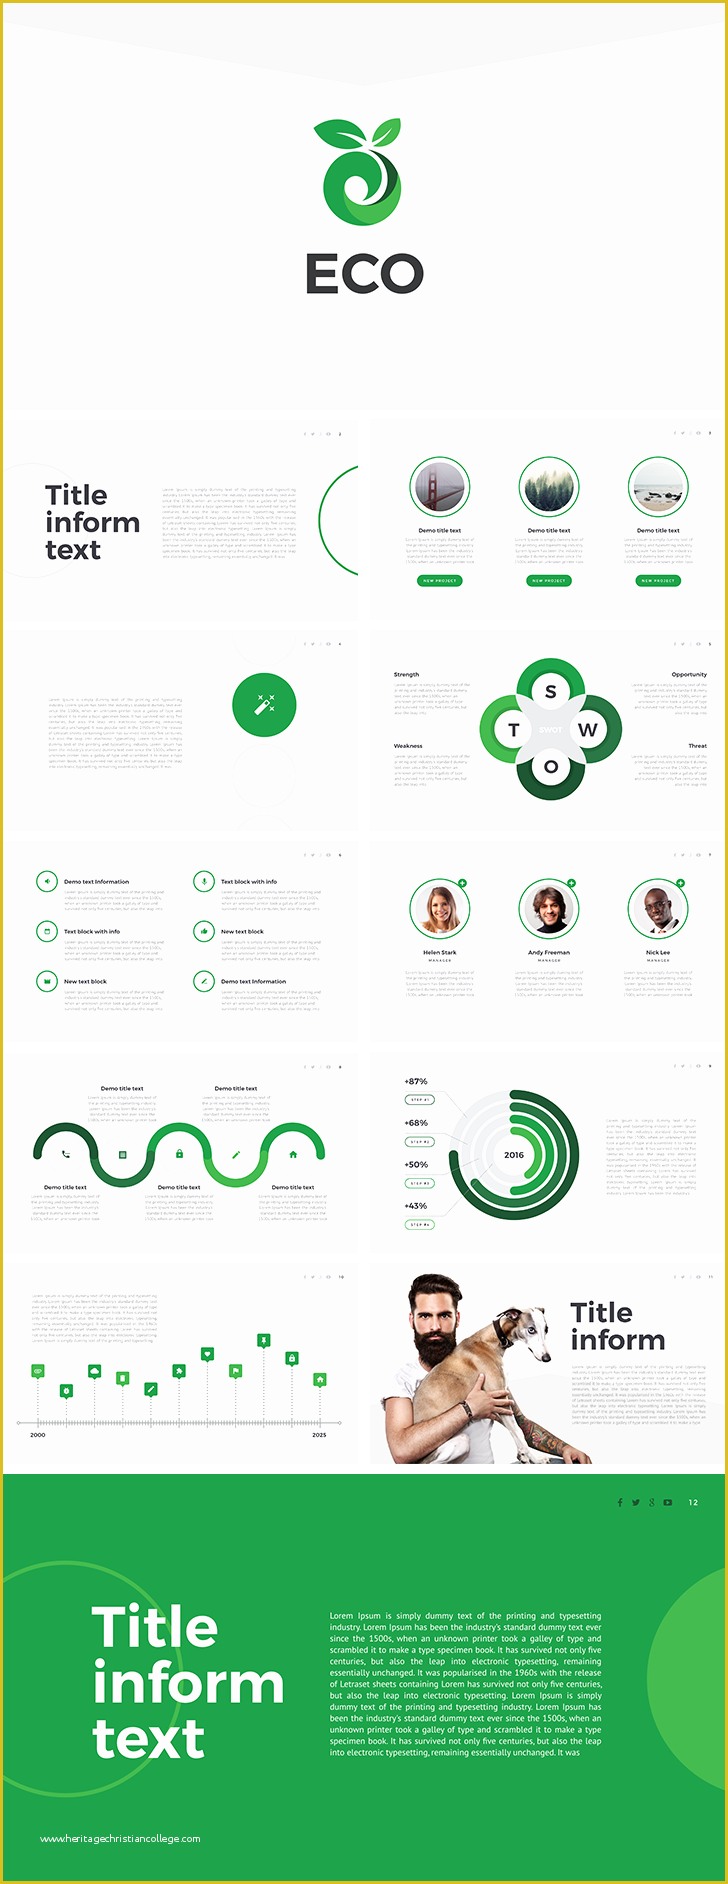 Free Keynote Templates Of Eco Free Keynote Template Free Download now